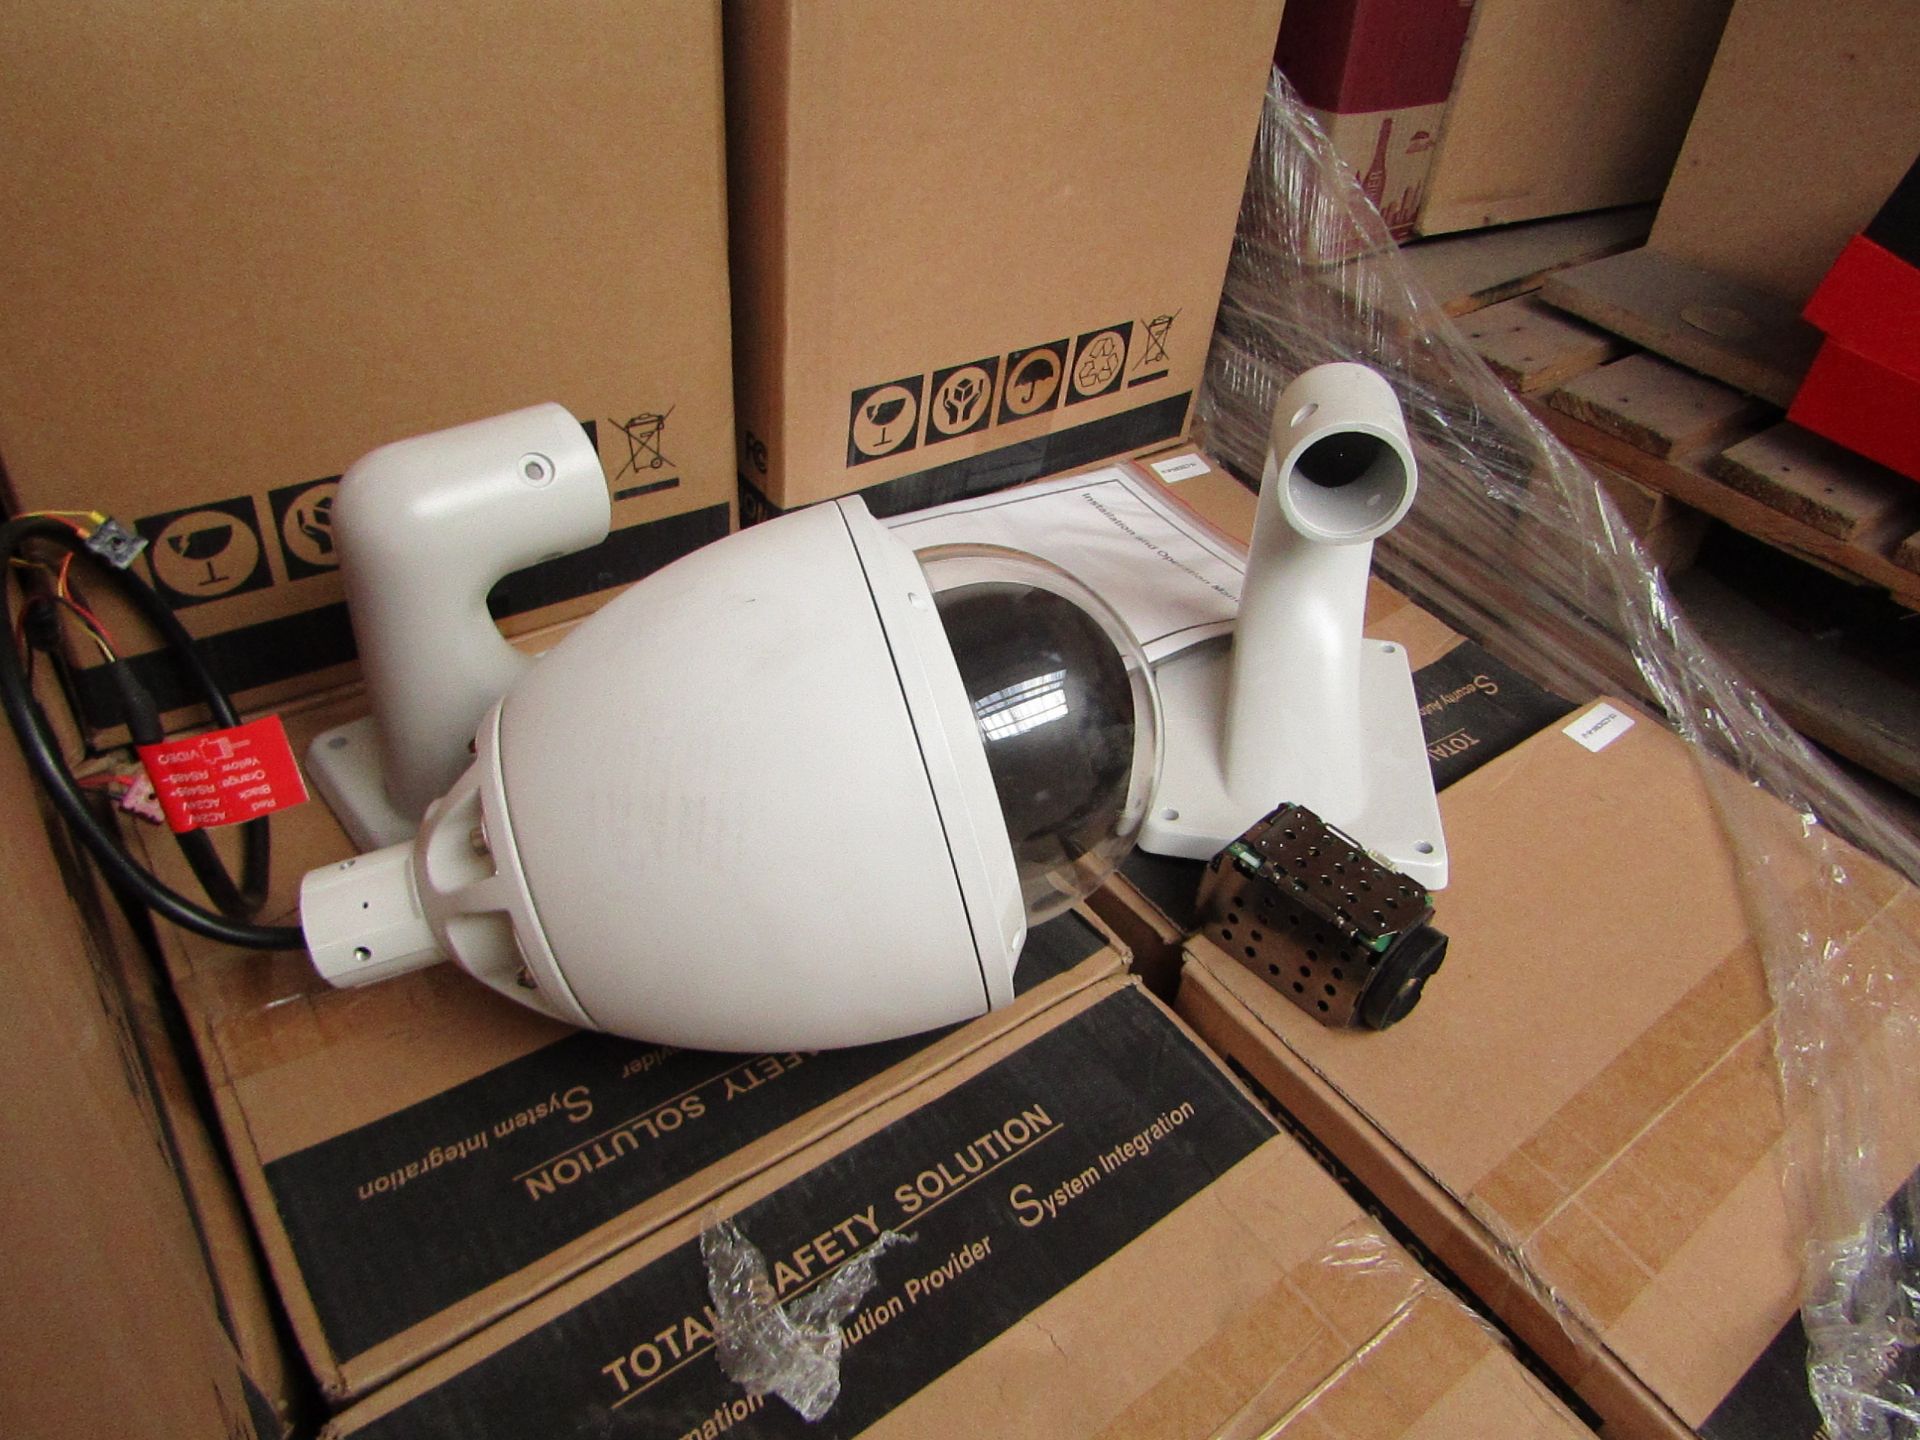 Cop Security full PTZ camera set with spare wall bracket, vendor suggests tested working and